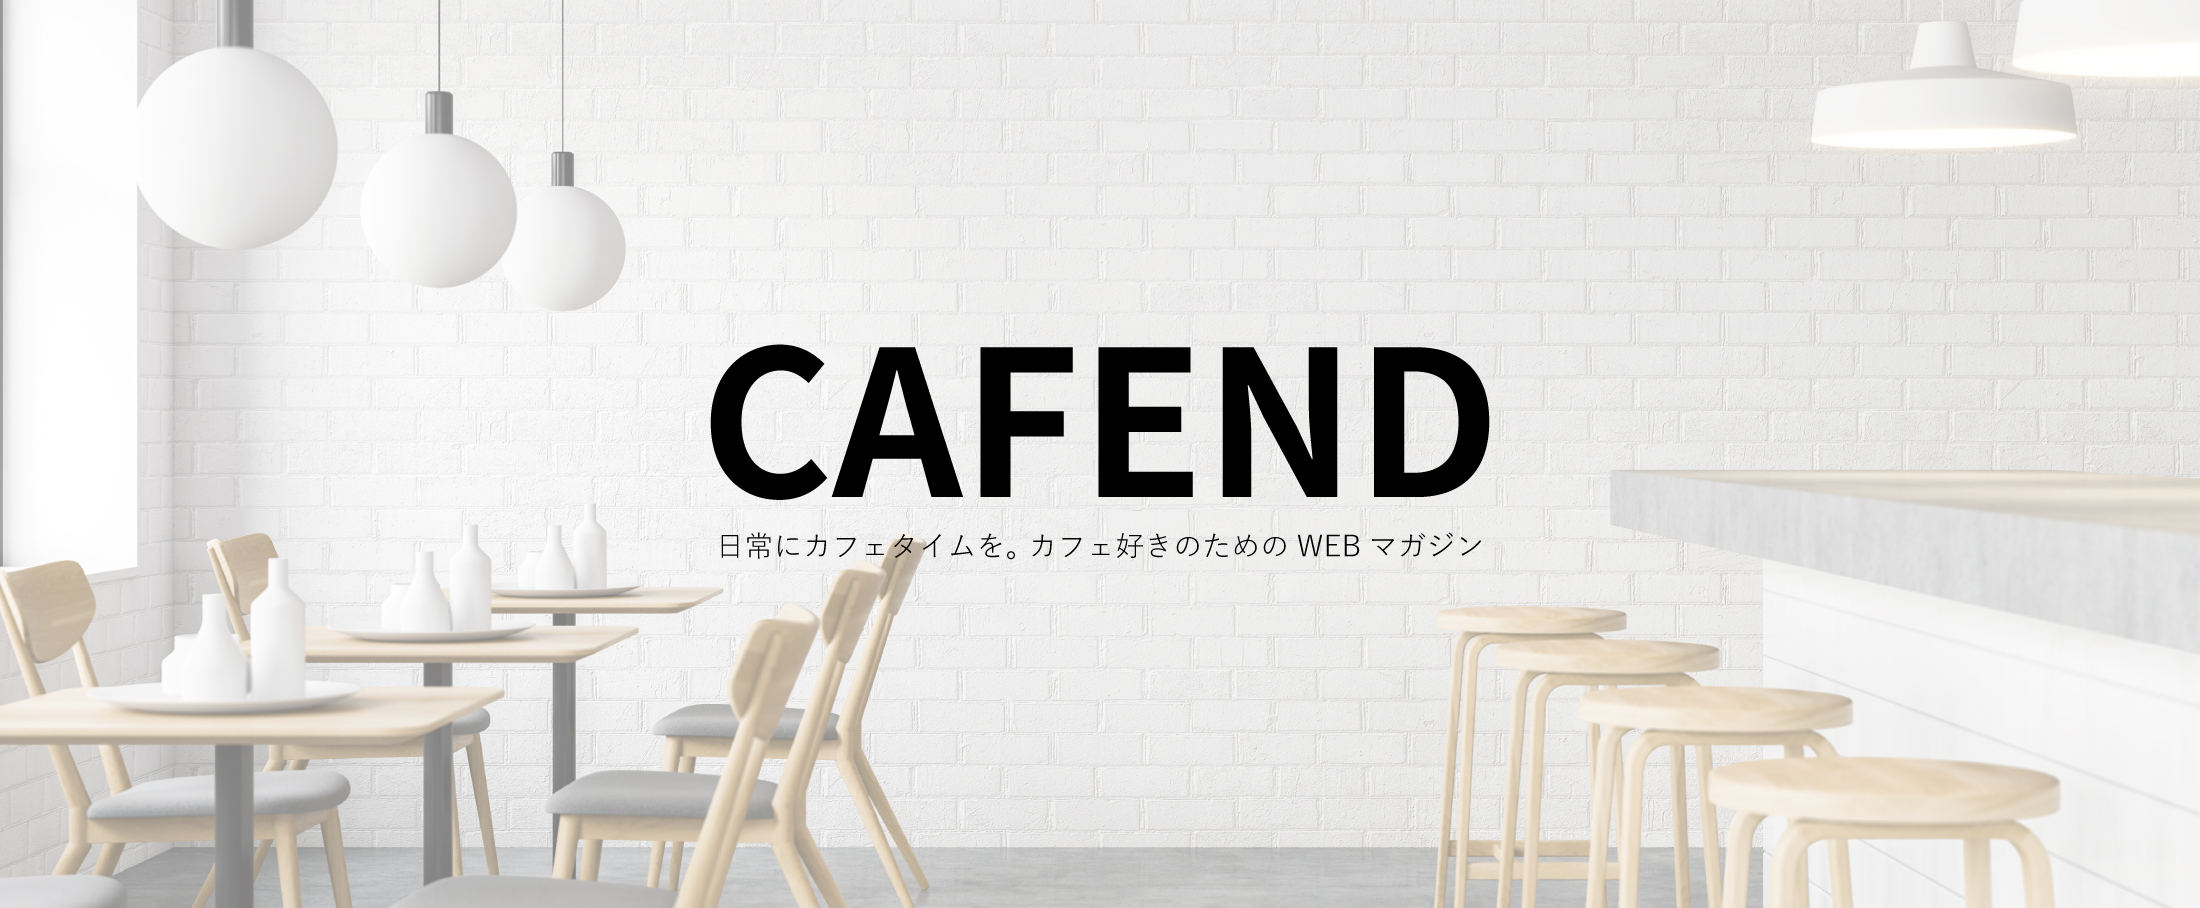 CAFEND